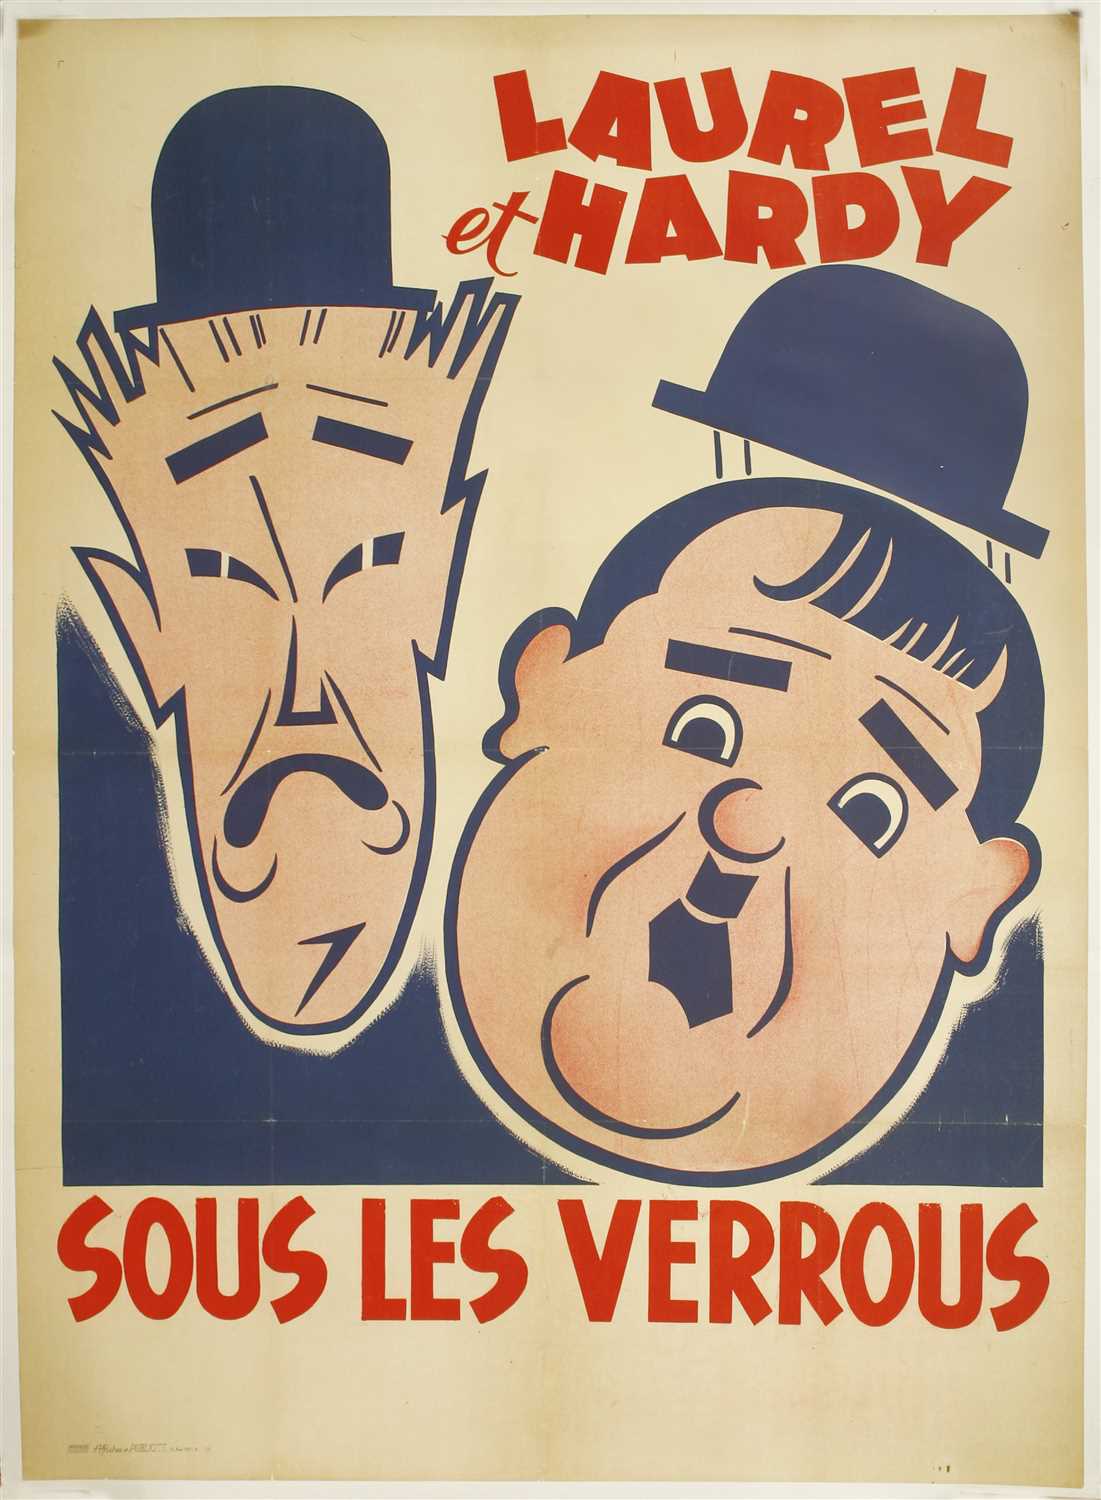 Lot 196 - A French Laurel and Hardy poster